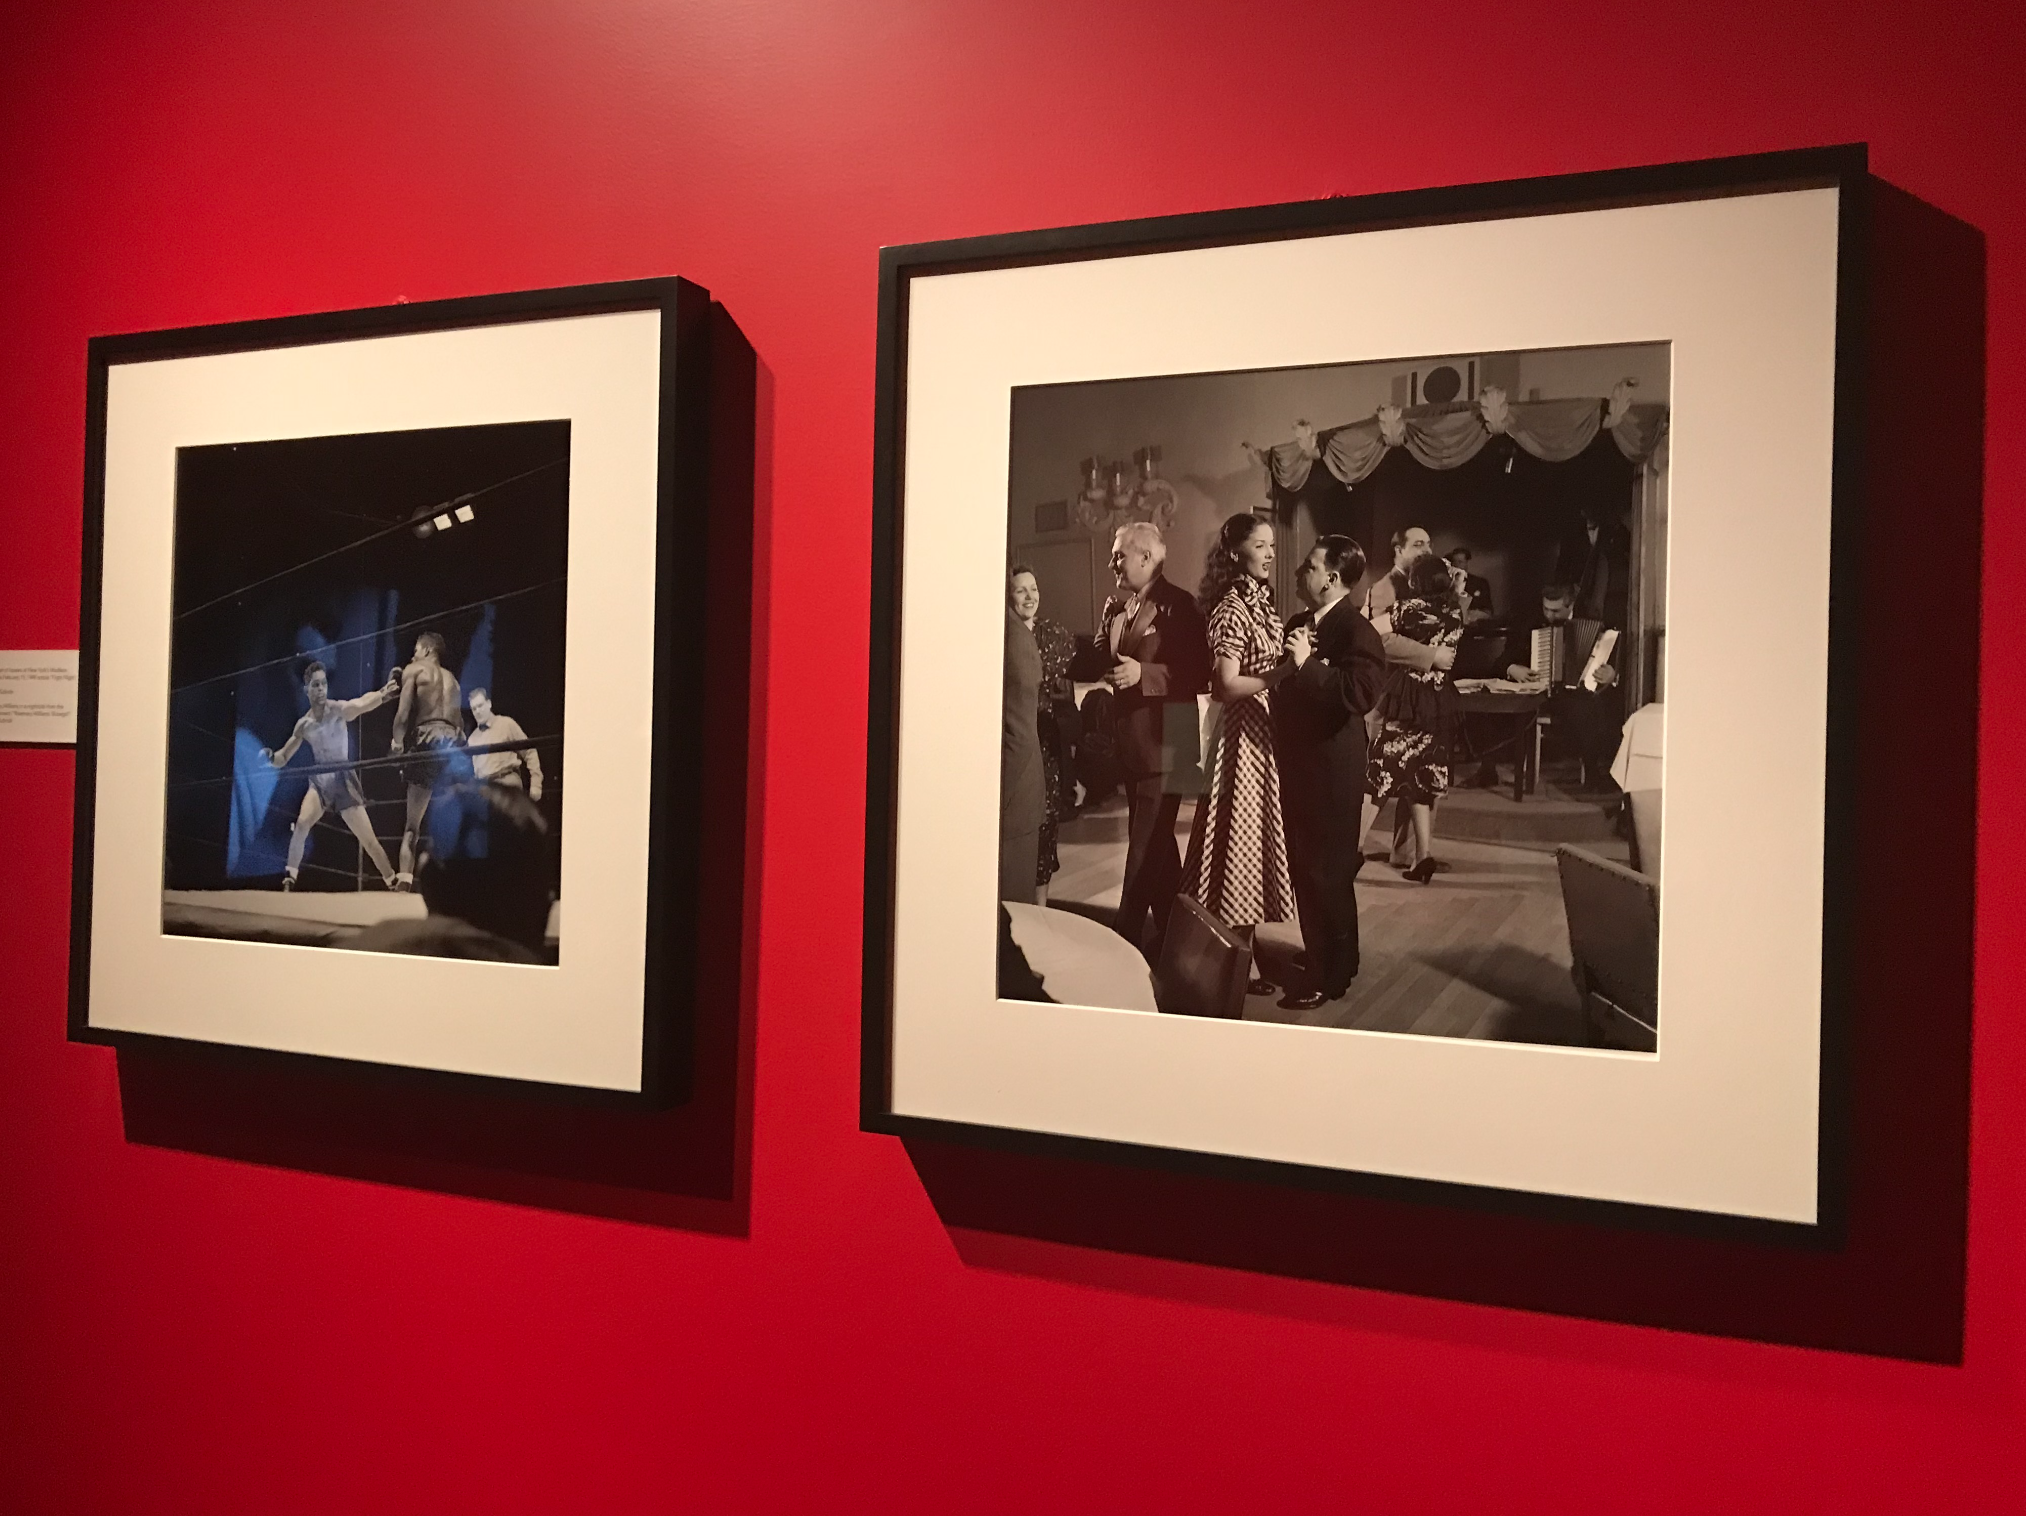 kubrick photographs as shown at the city museum of new yorl